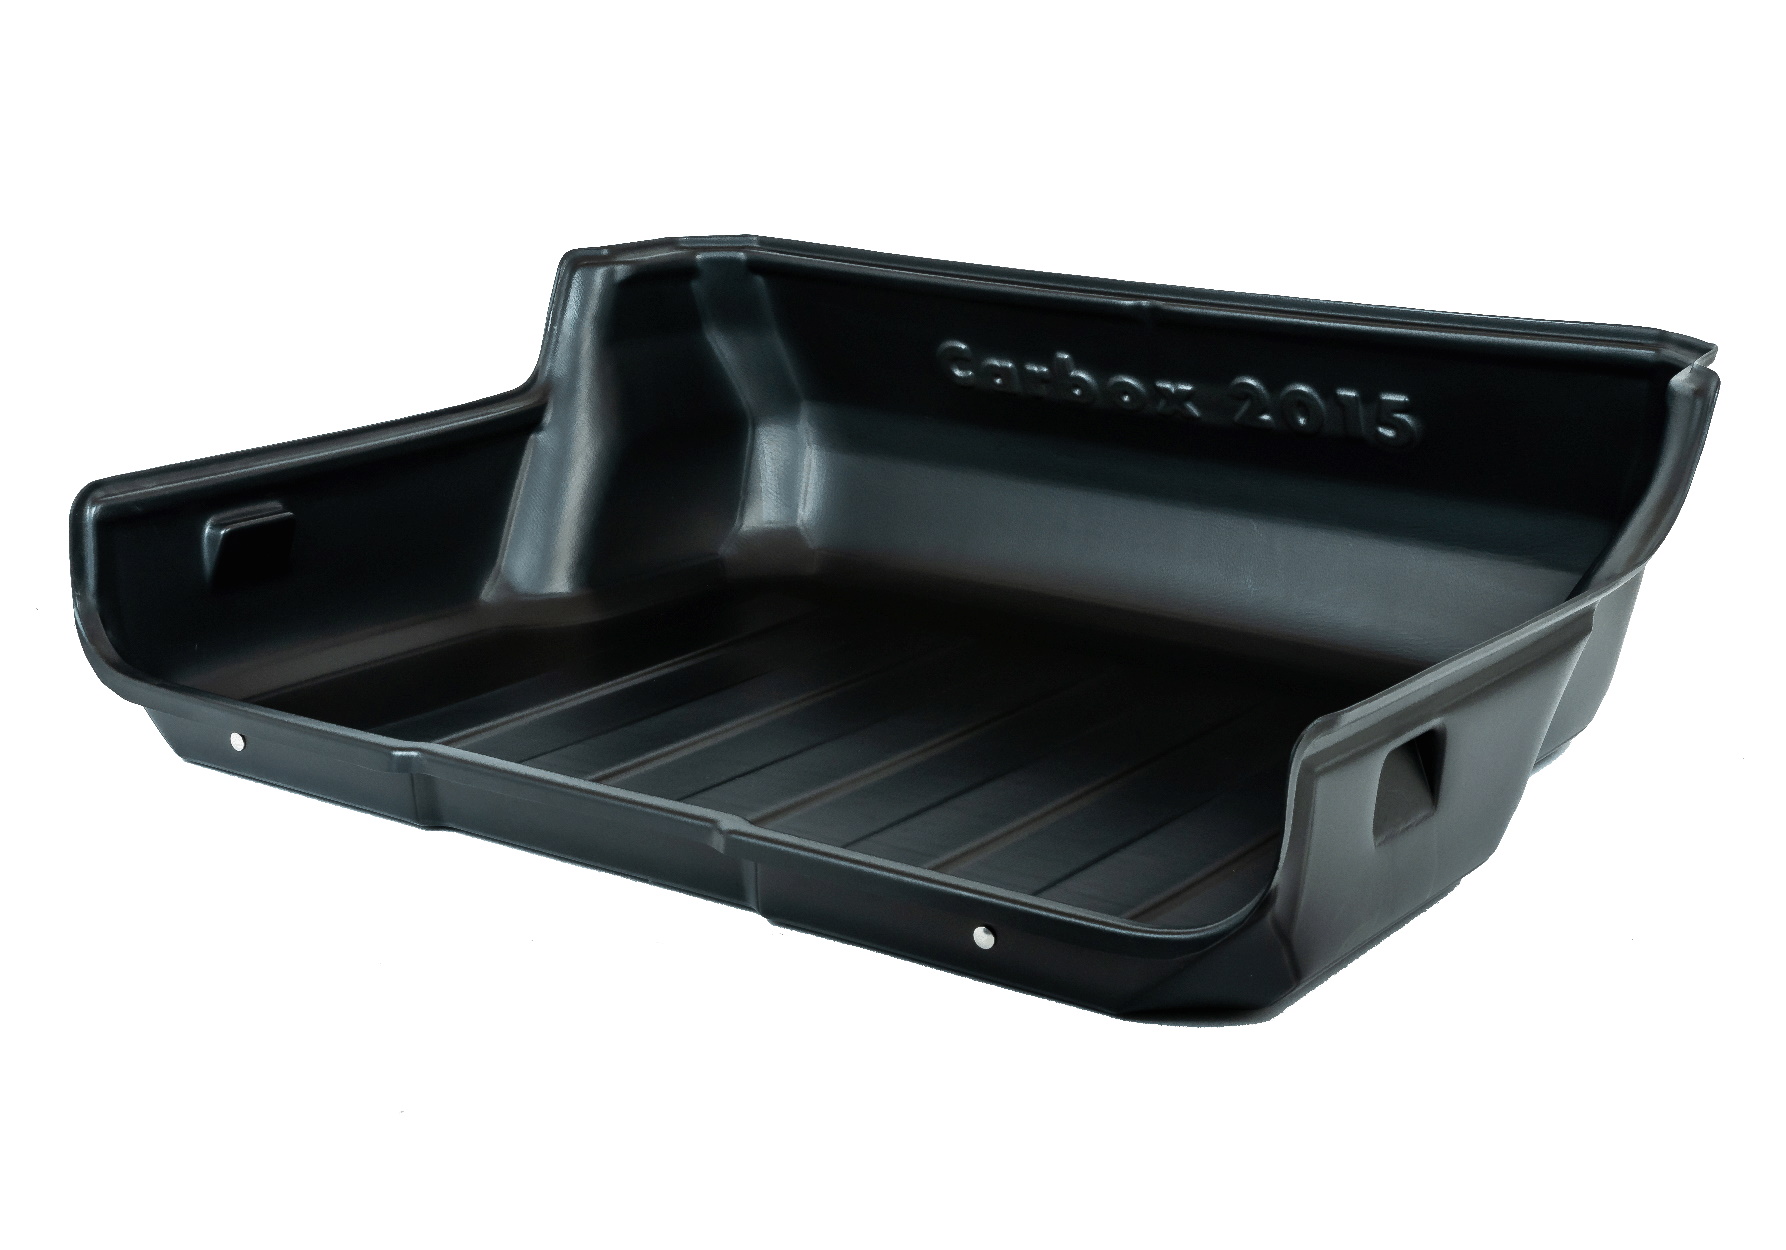 BMW 3 series Touring (2019 onwards):Carbox Classic S boot liner, black, for BMW 3 series, 102015000